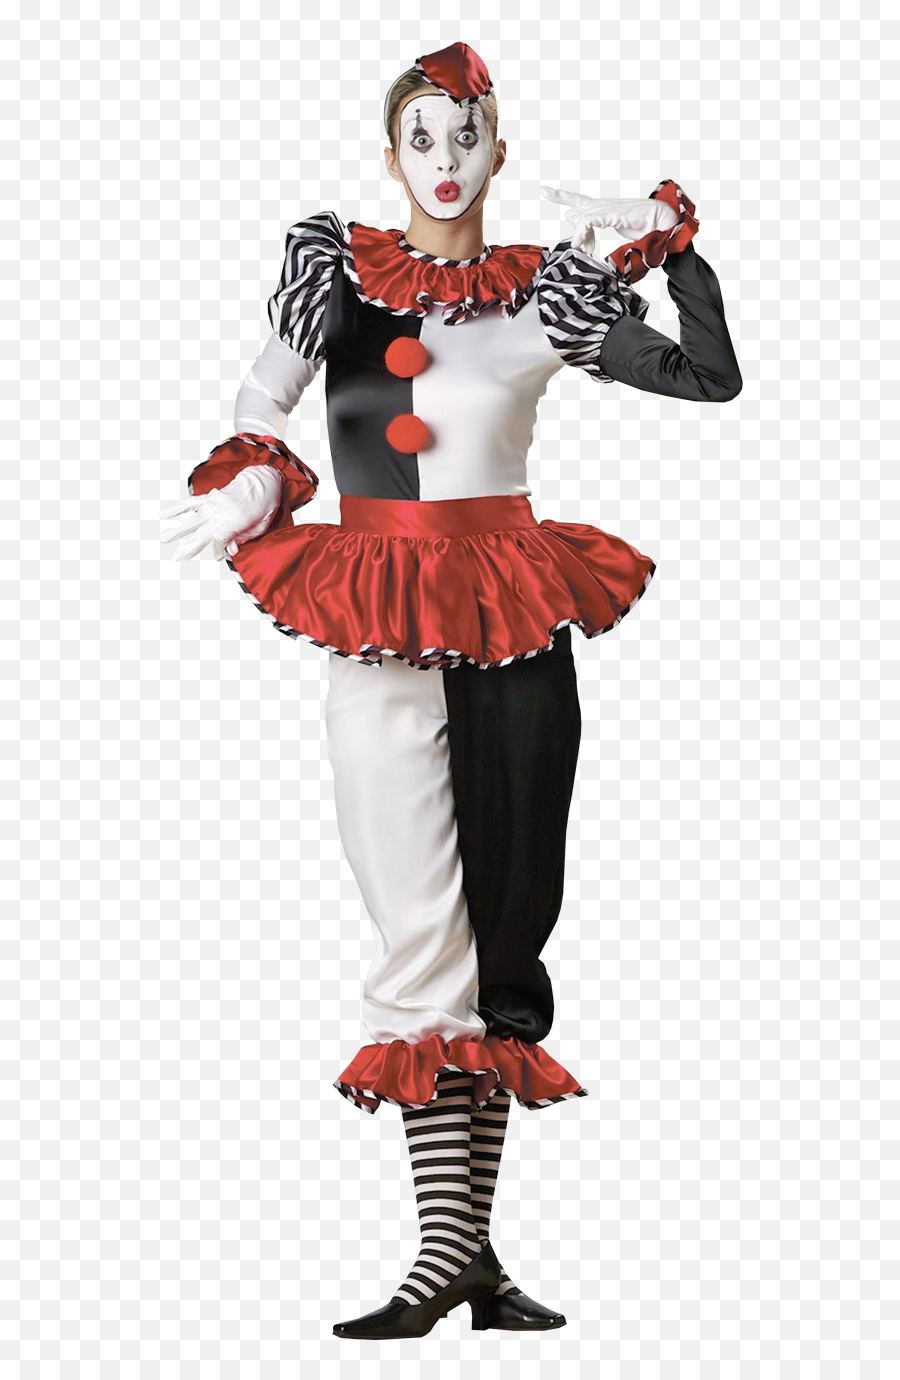 Download Clown Png Image For Free - Harlequin Clown,Clown Wig Transparent